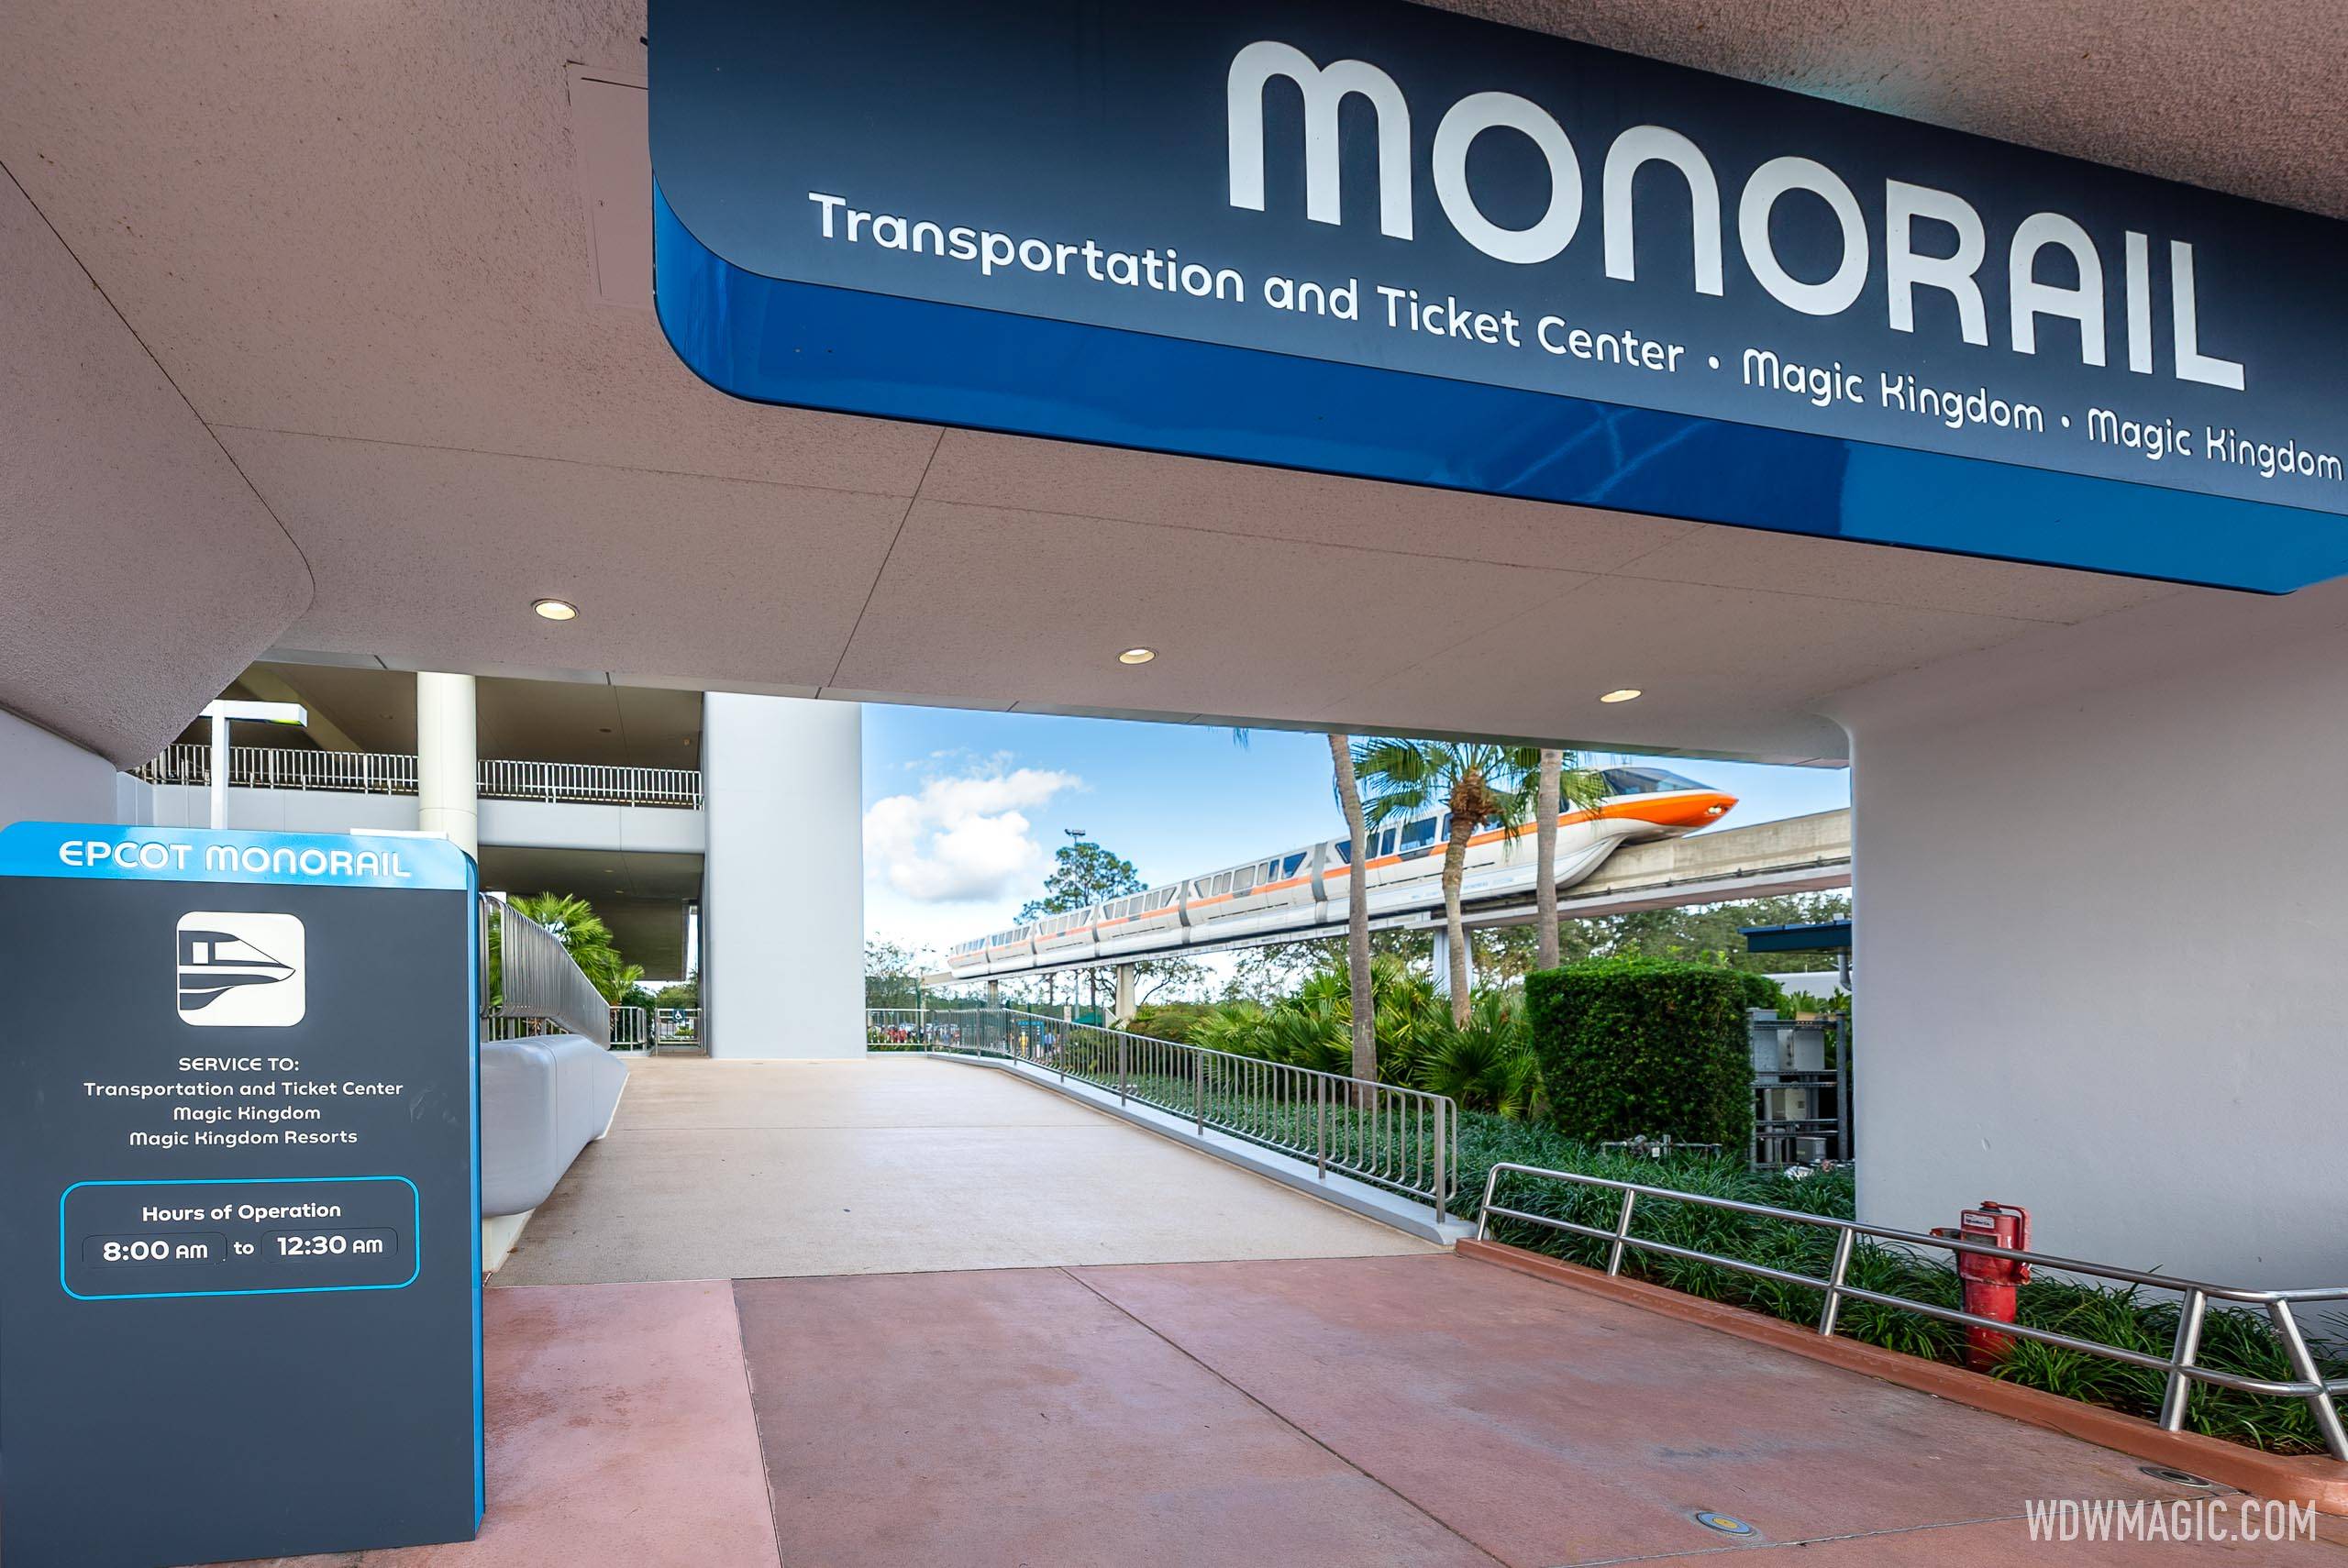 More new operational signage added to EPCOT's monorail station